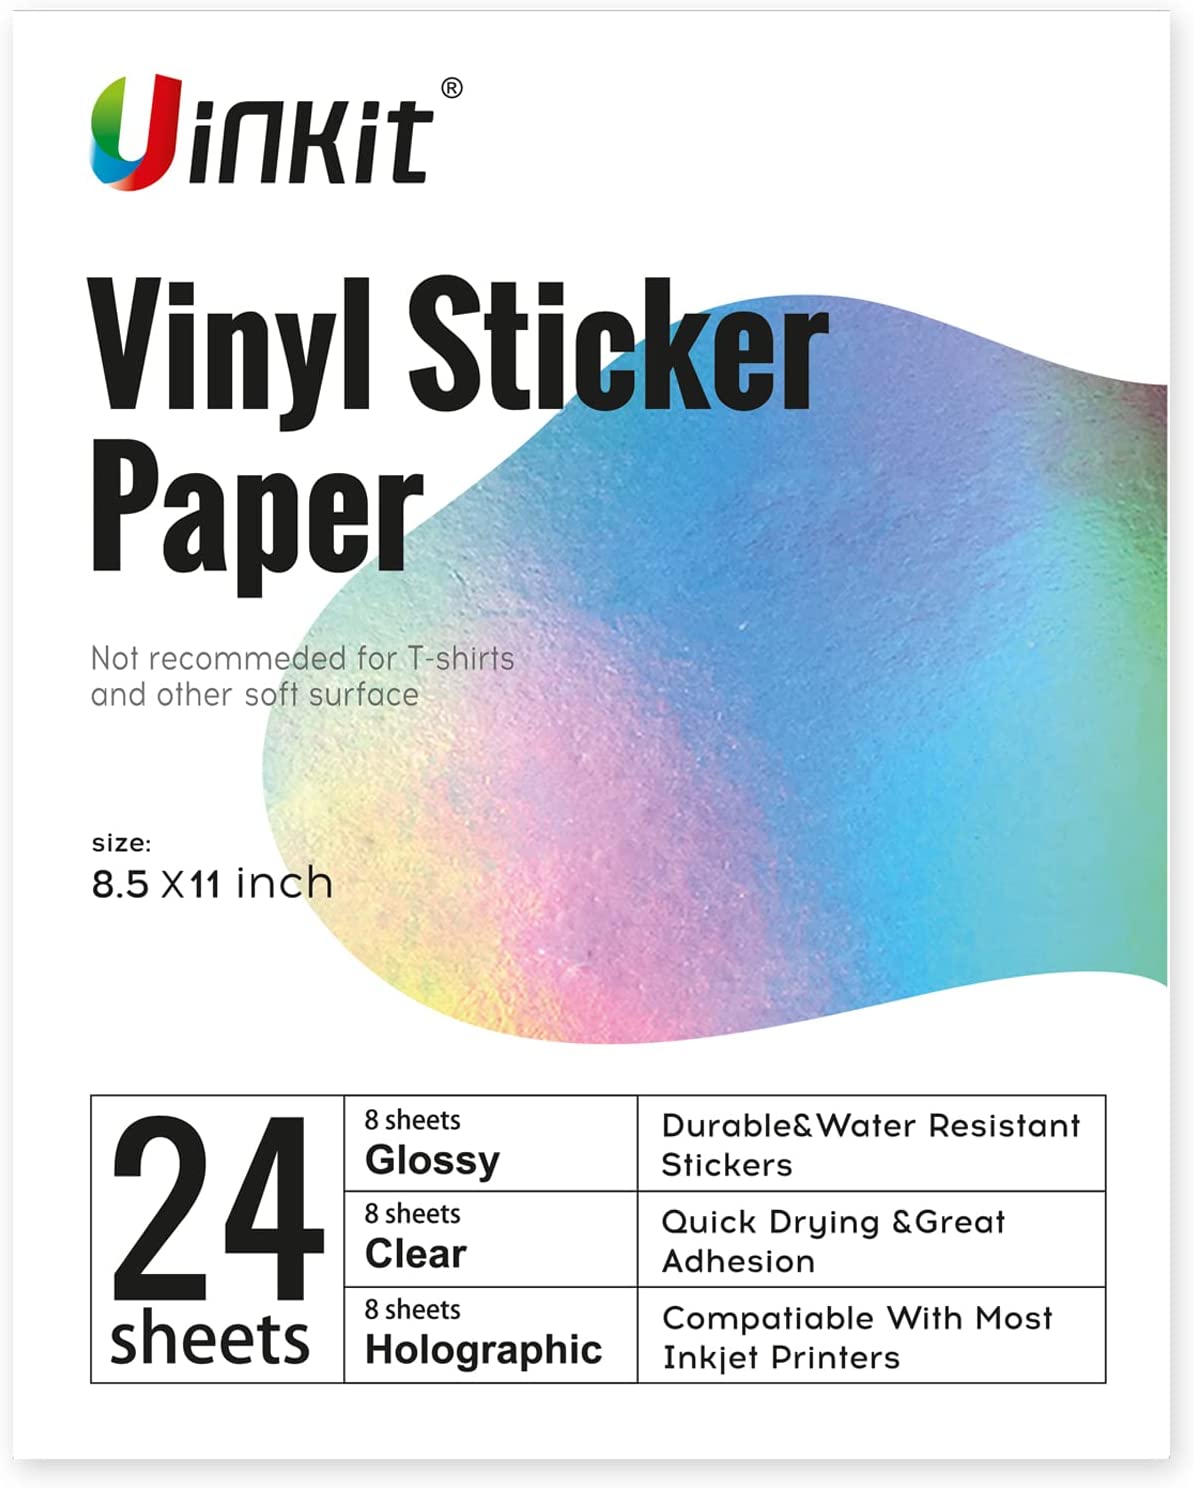 Uinkit Printable Magnetic sheets Non Adhesive 13.5mil 8.5 x 11 Inches